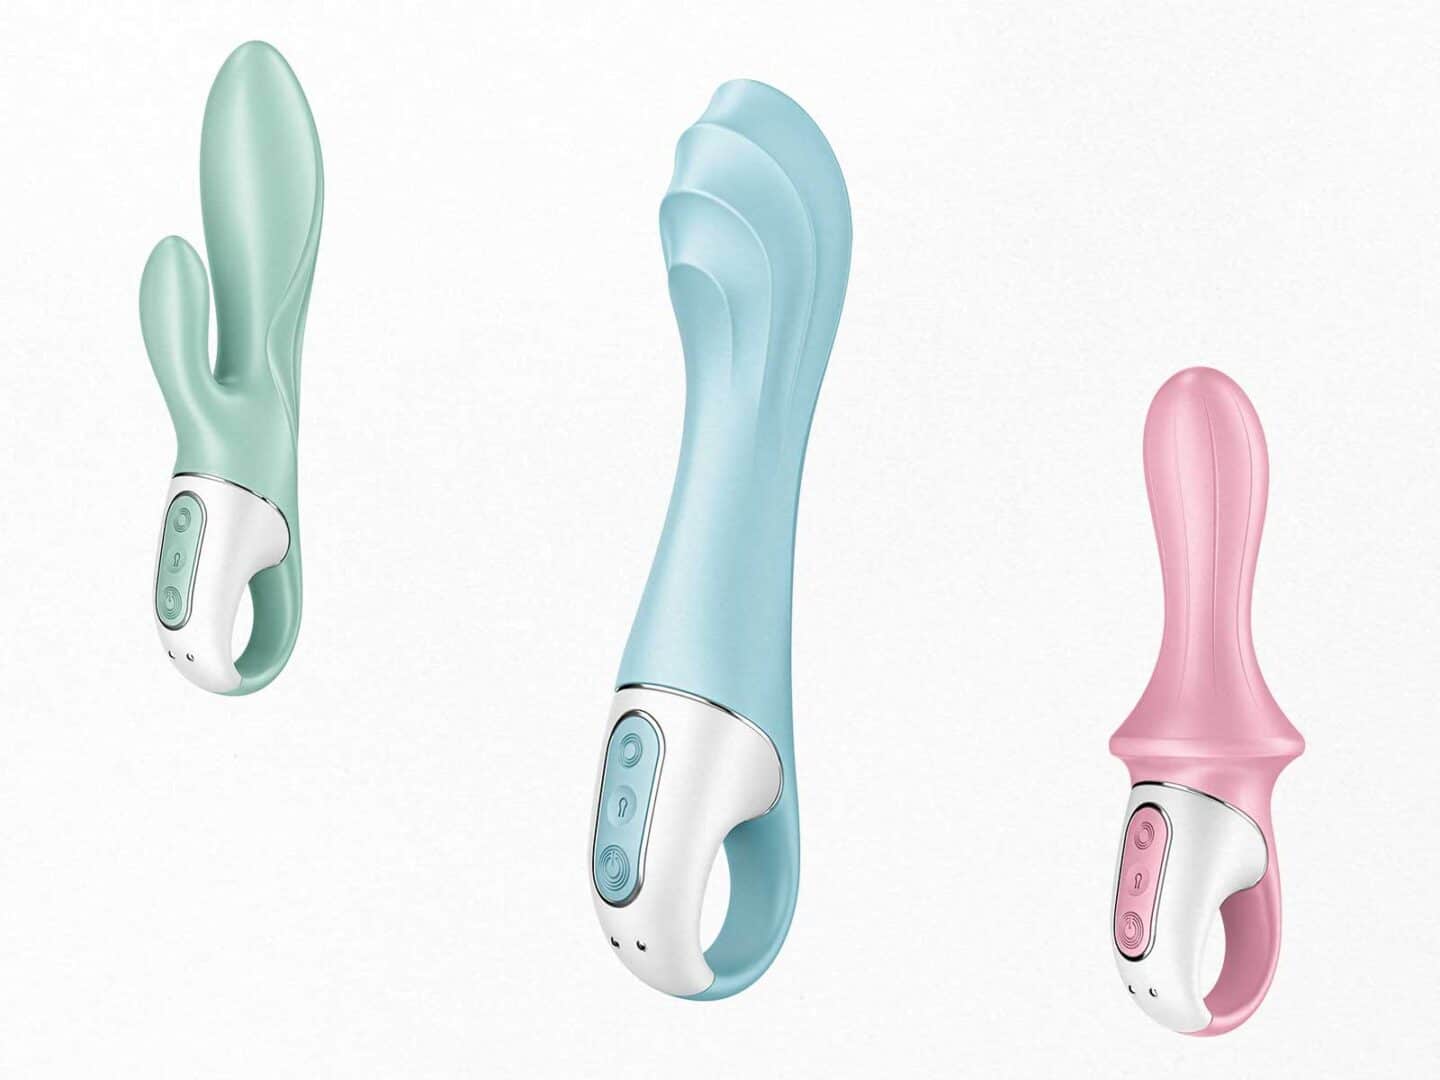 Haven’t you heard about Satisfyer’s new Air Pump technology yet?